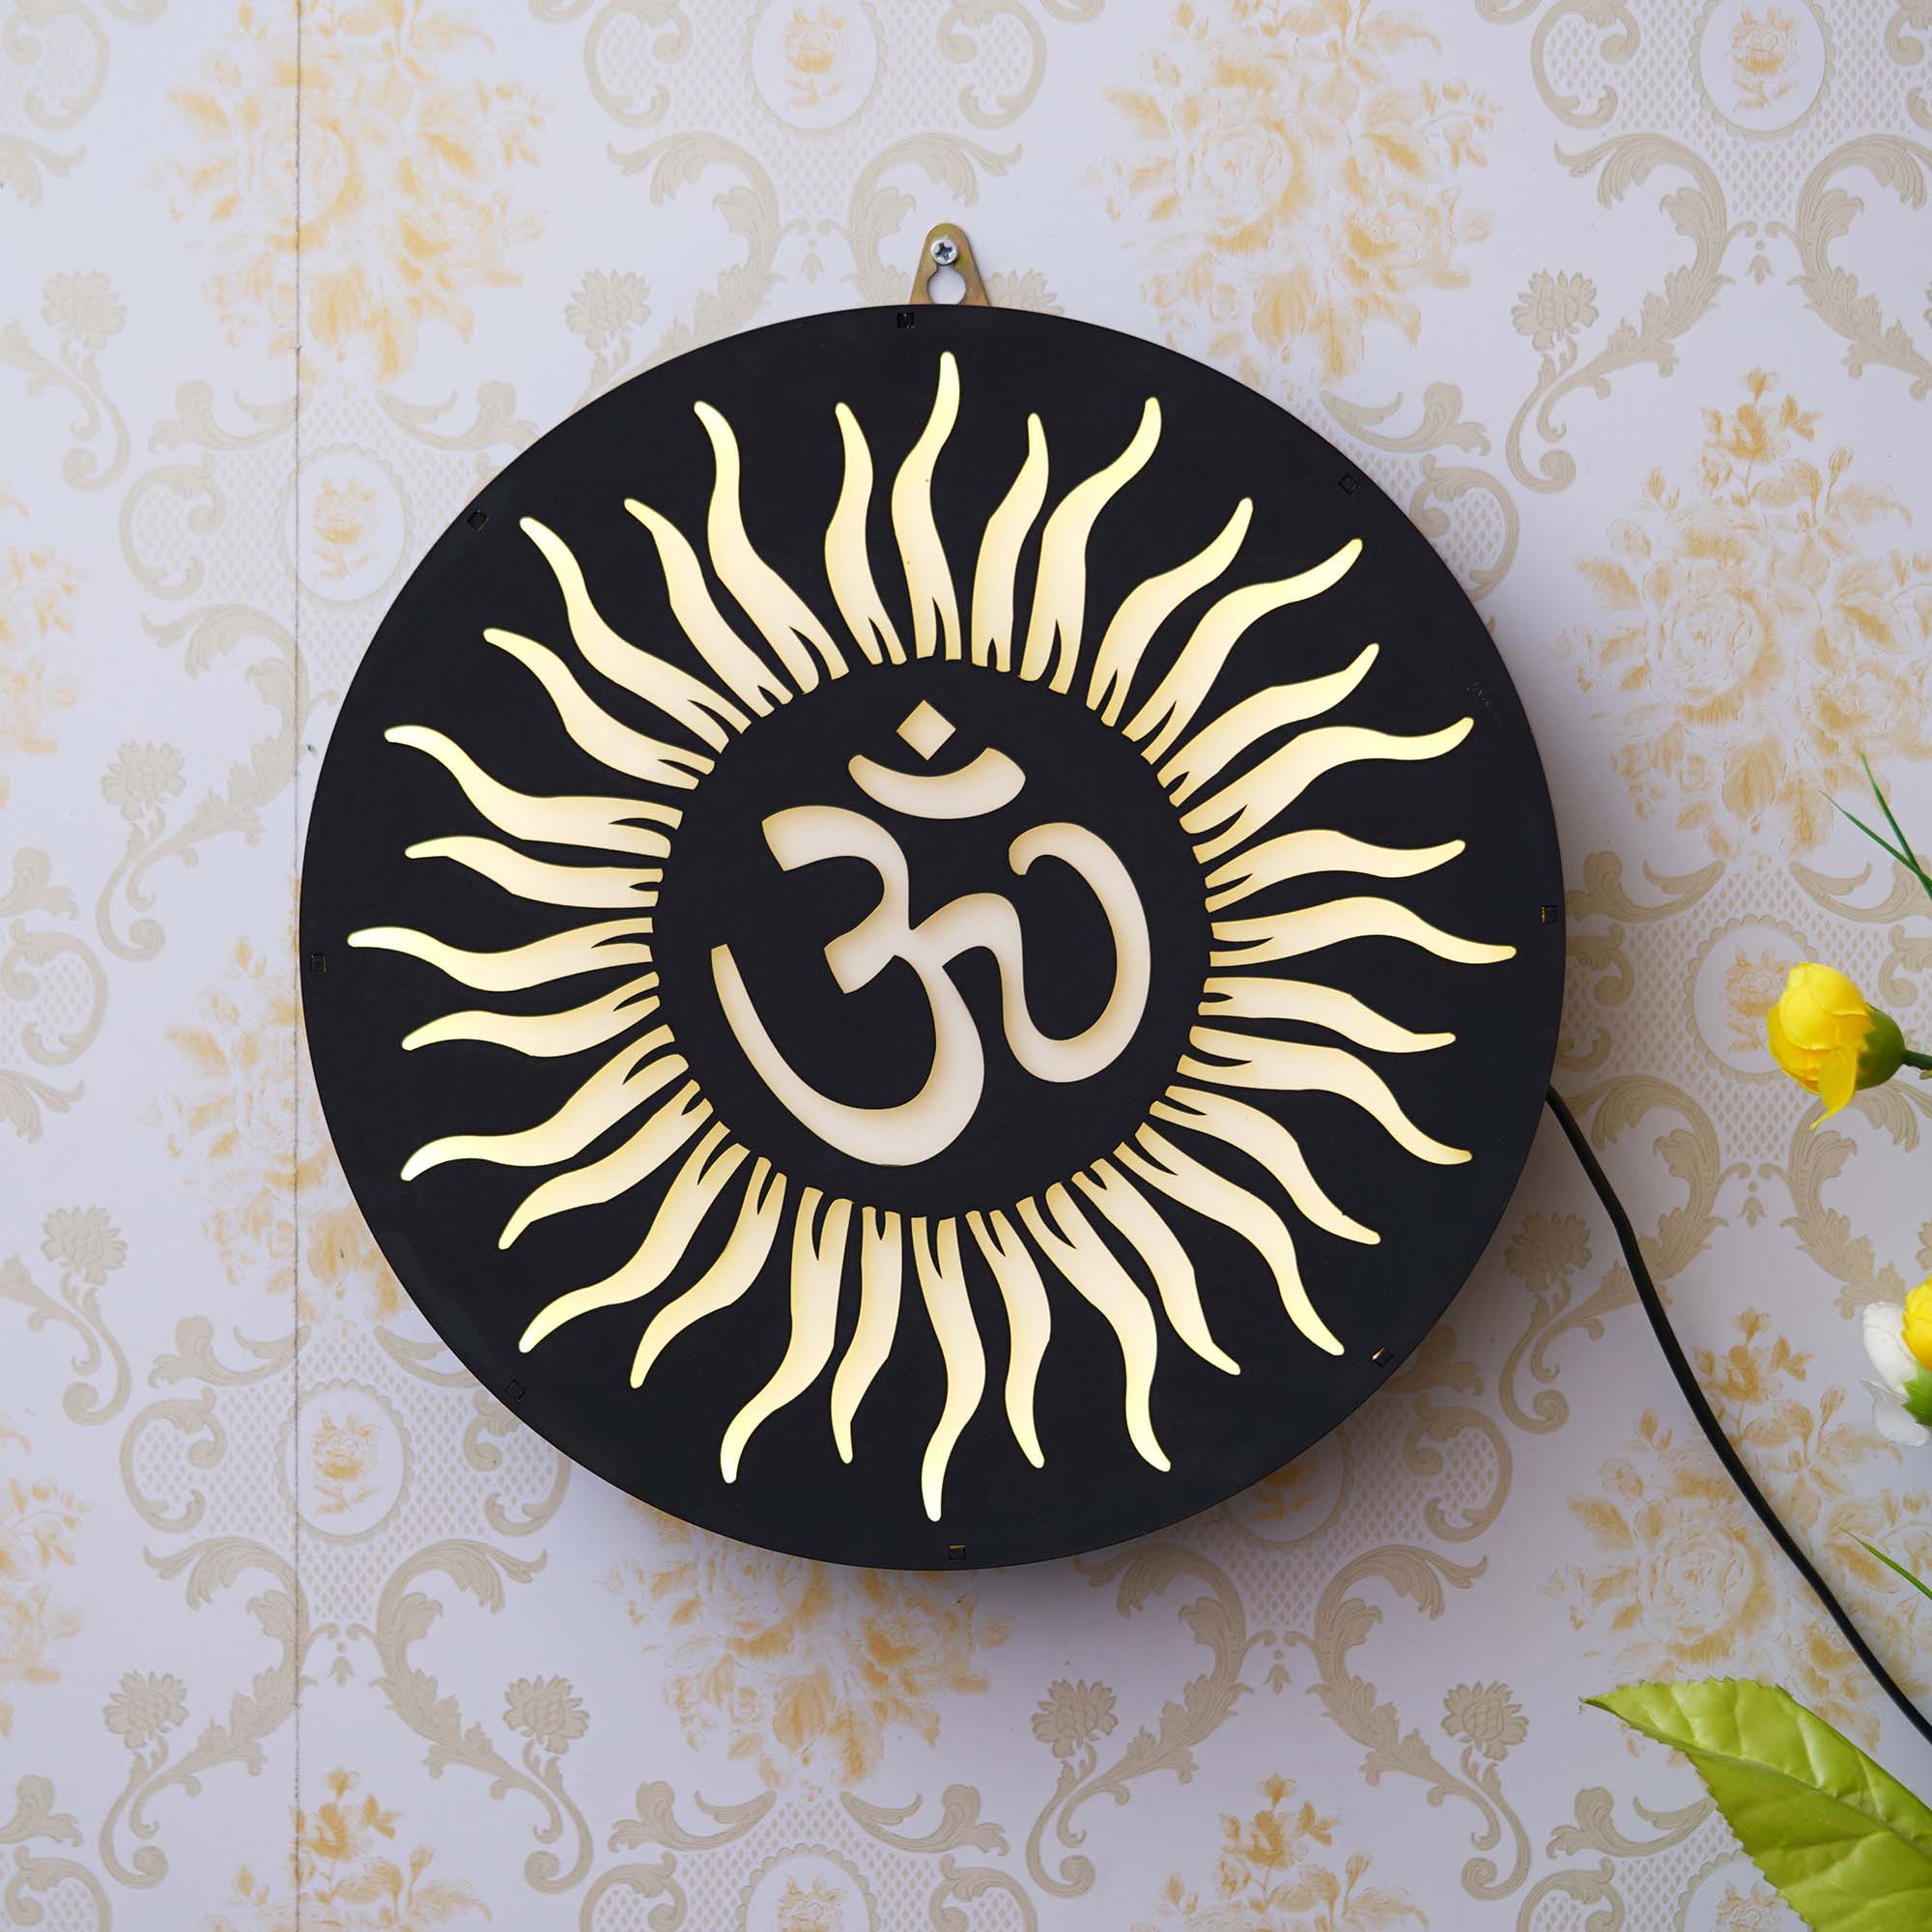 Sun and Om Symbol Wooden Cutout LED Light Lamp Decorative Wall Hanging